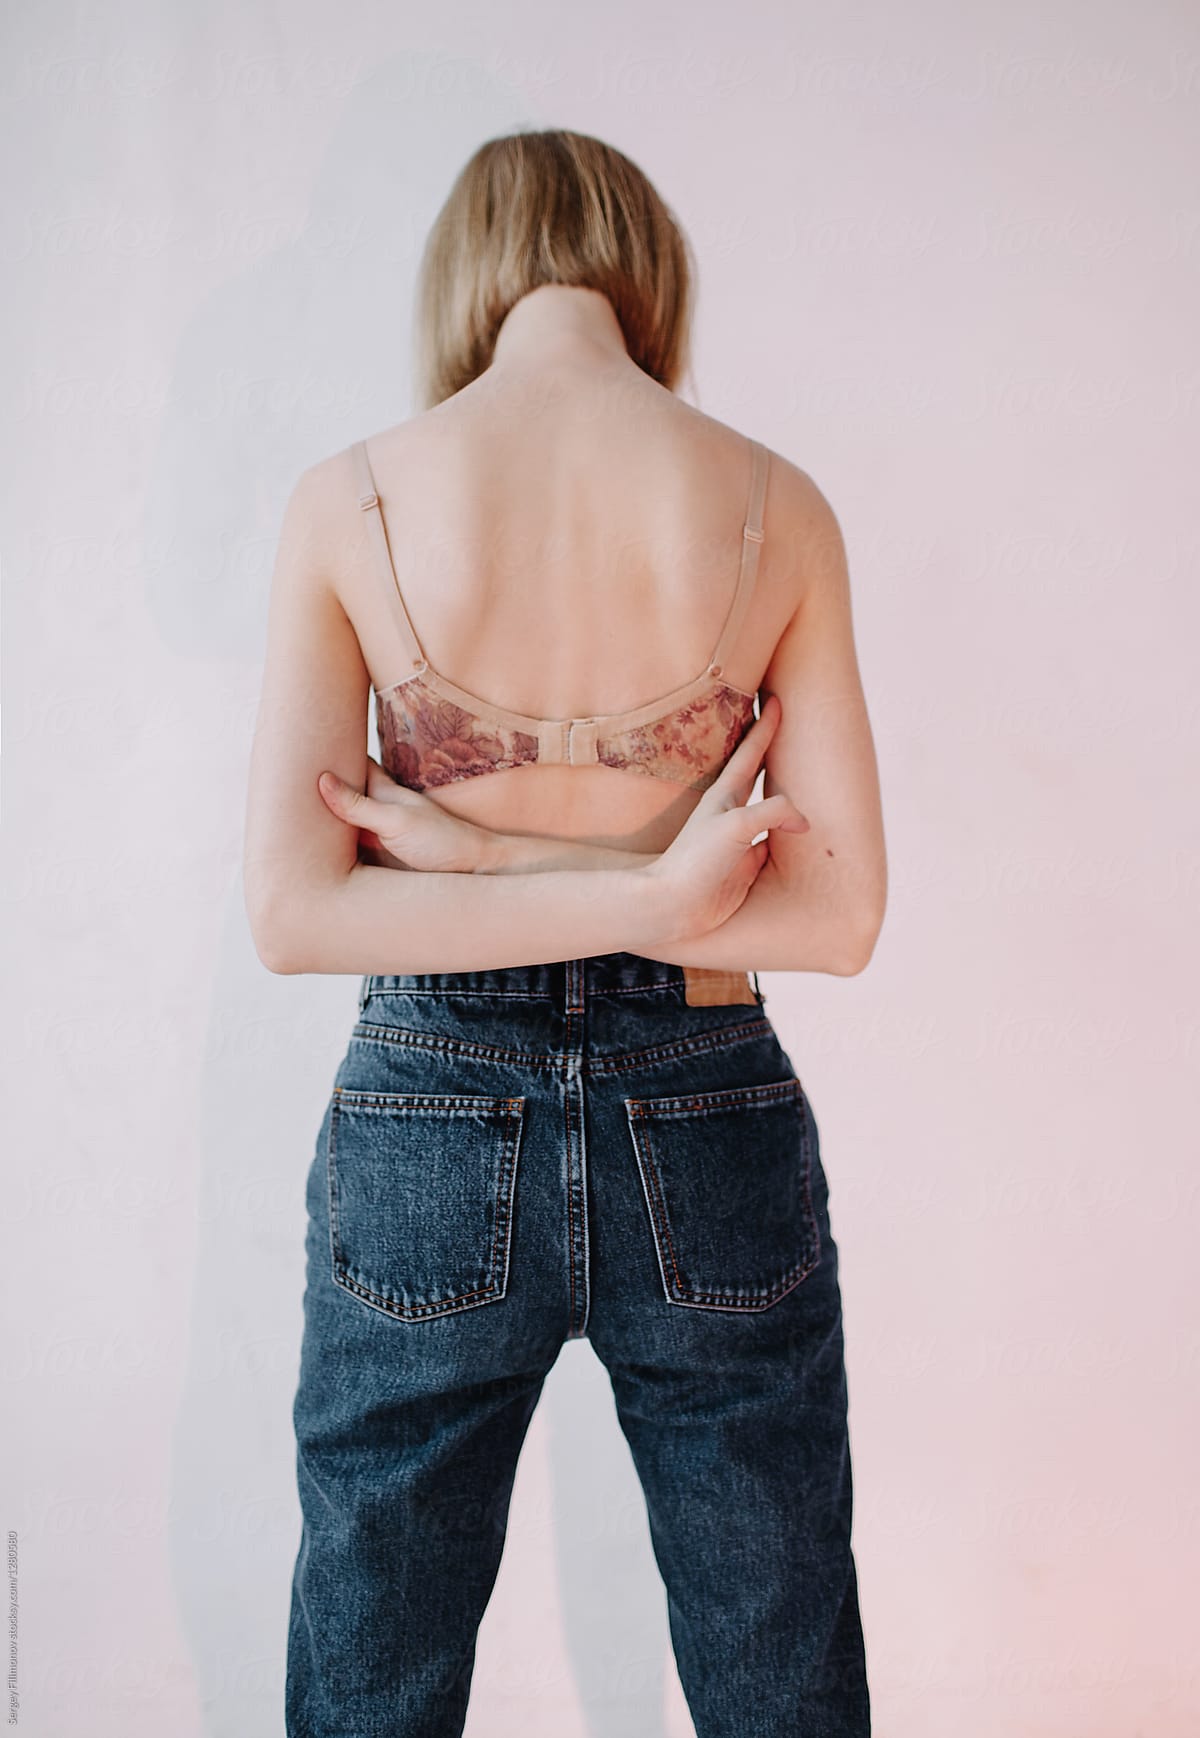 Back view of blonde girl in lingerie and jeans on a color background